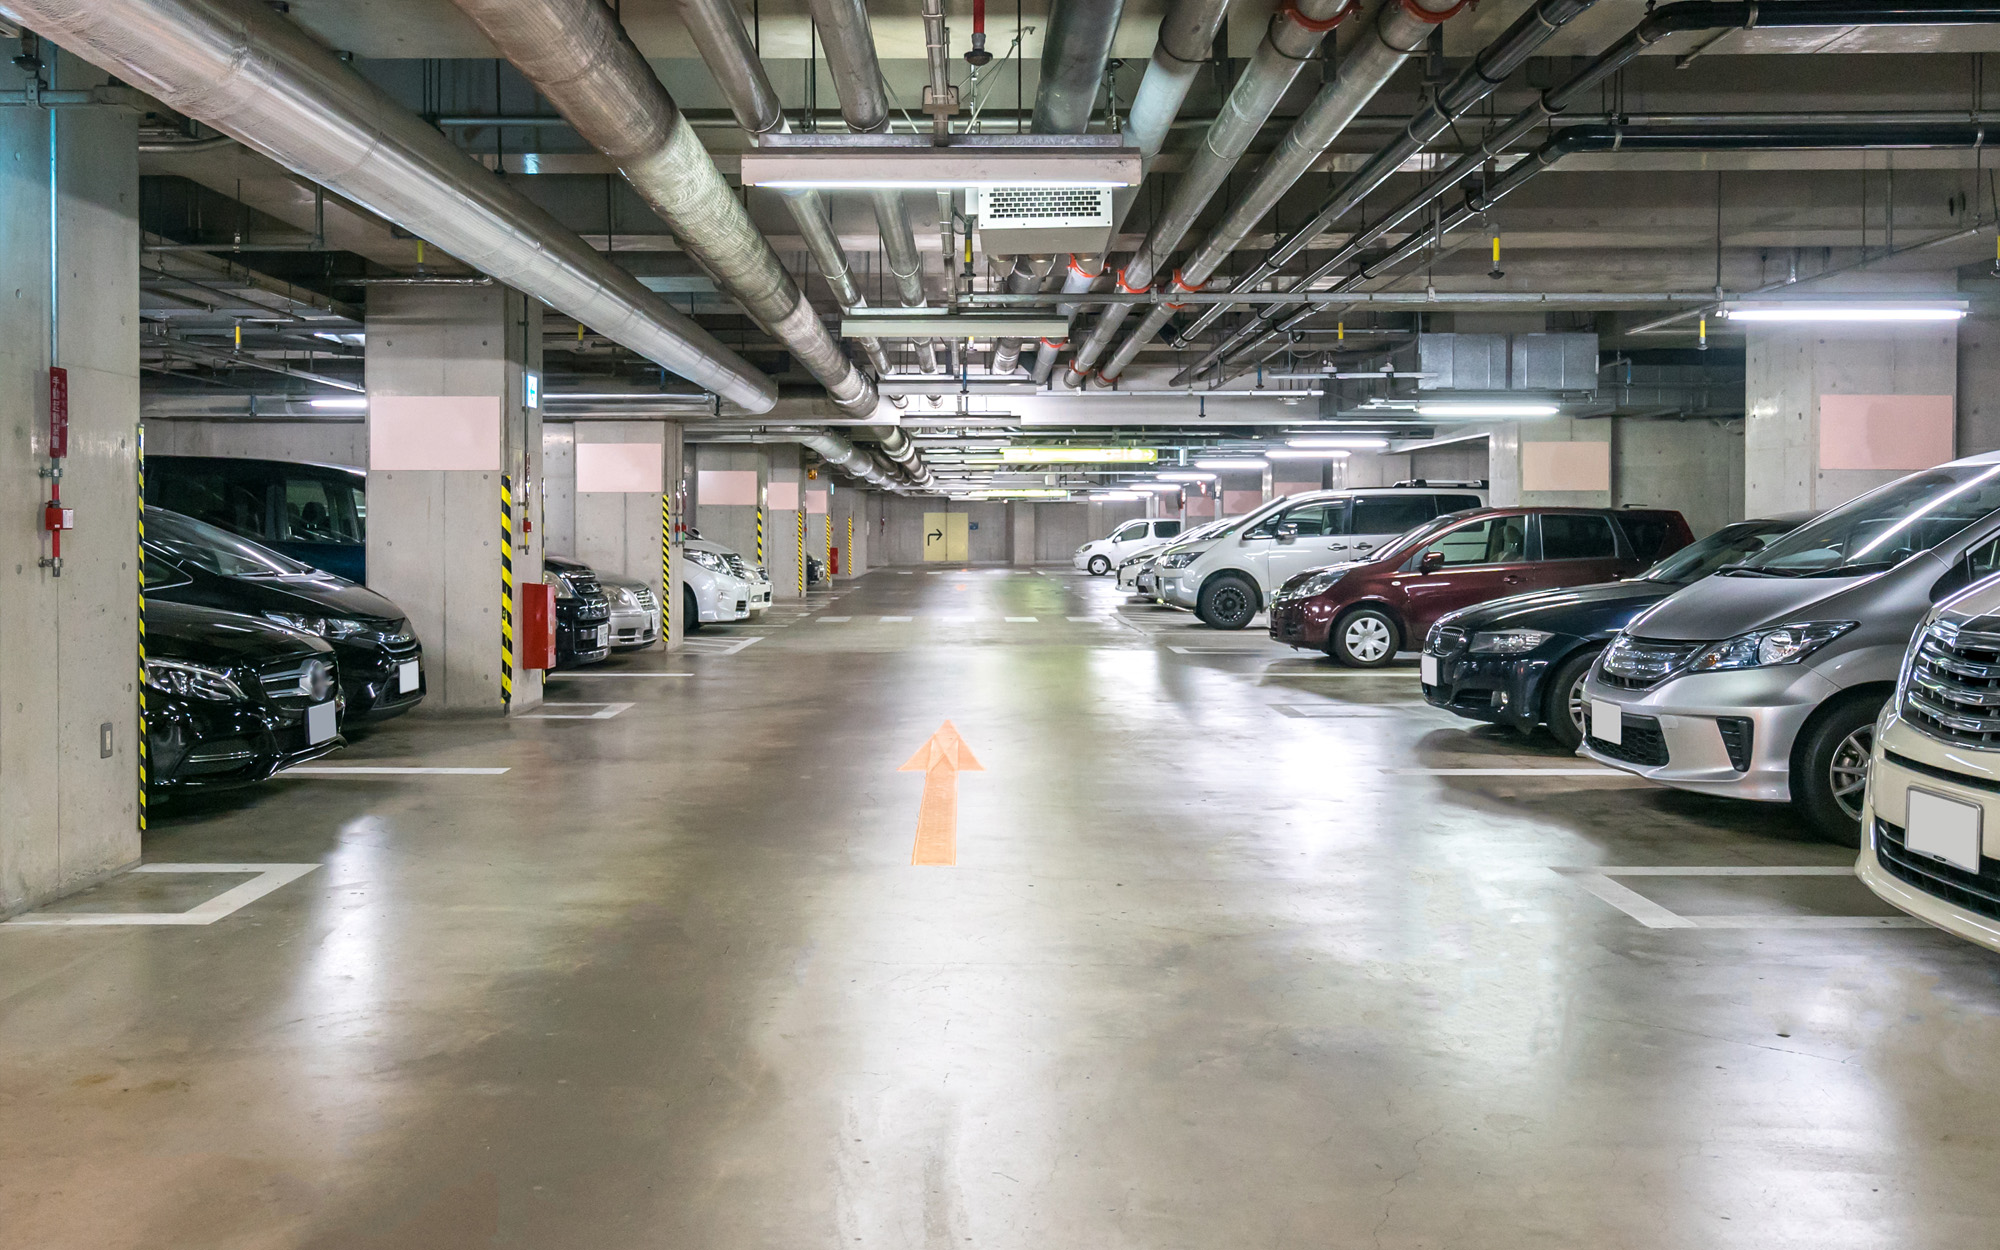 Need a Parking Garage Sweeped? We Help With That Too